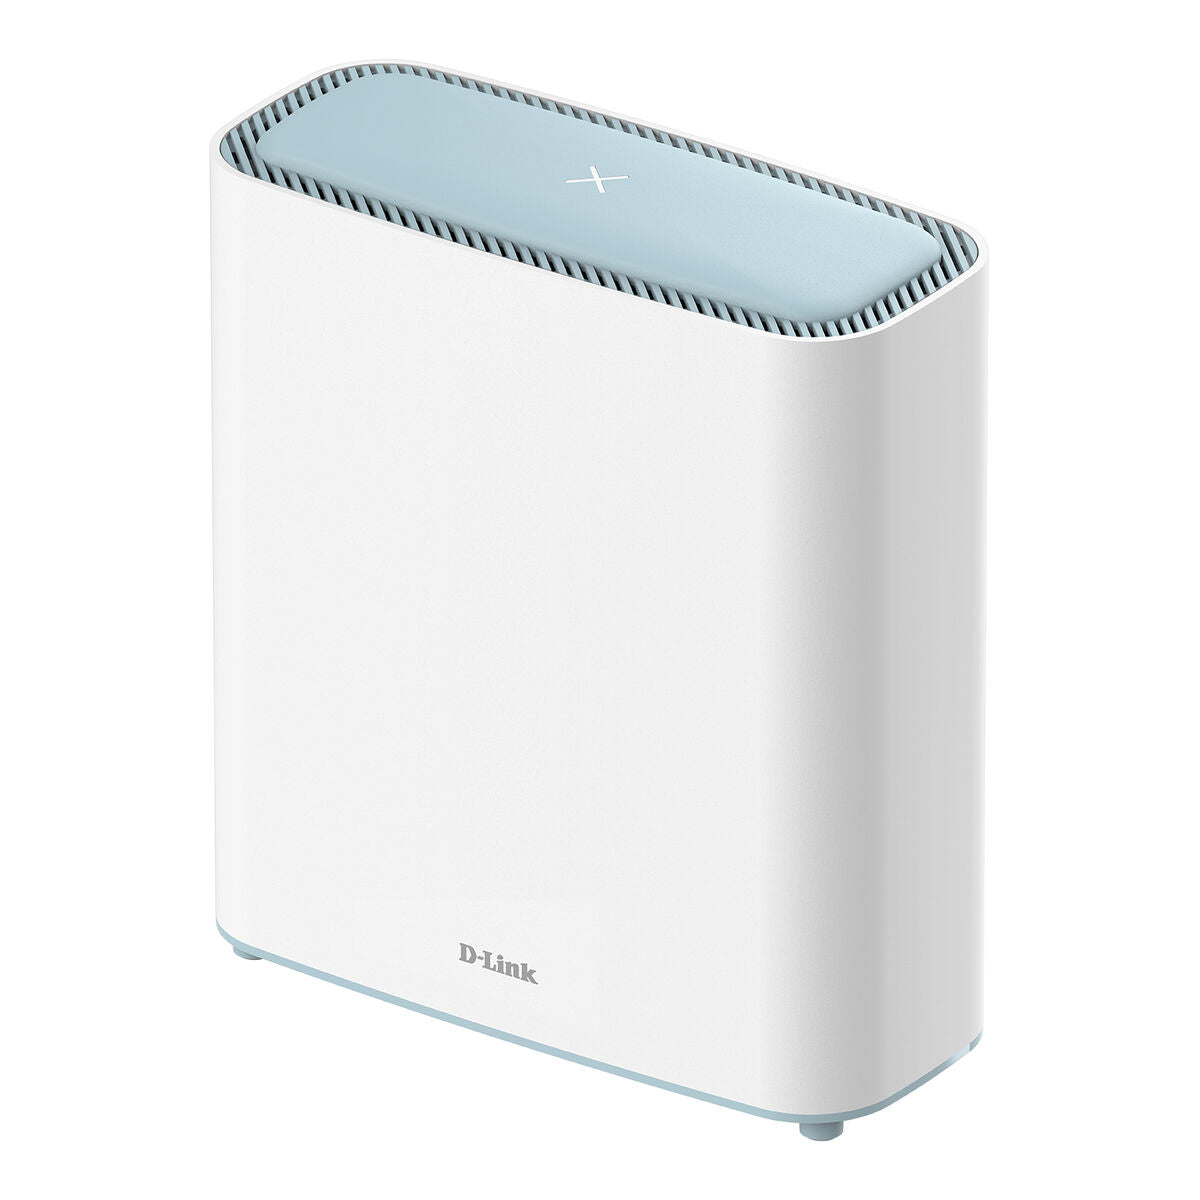 Access point D-Link M32-2 White Gigabit Ethernet Mesh, D-Link, Computing, Network devices, access-point-d-link-m32-2-white-gigabit-ethernet-mesh, Brand_D-Link, category-reference-2609, category-reference-2803, category-reference-2820, category-reference-t-19685, category-reference-t-19914, Condition_NEW, networks/wiring, Price_200 - 300, Teleworking, RiotNook